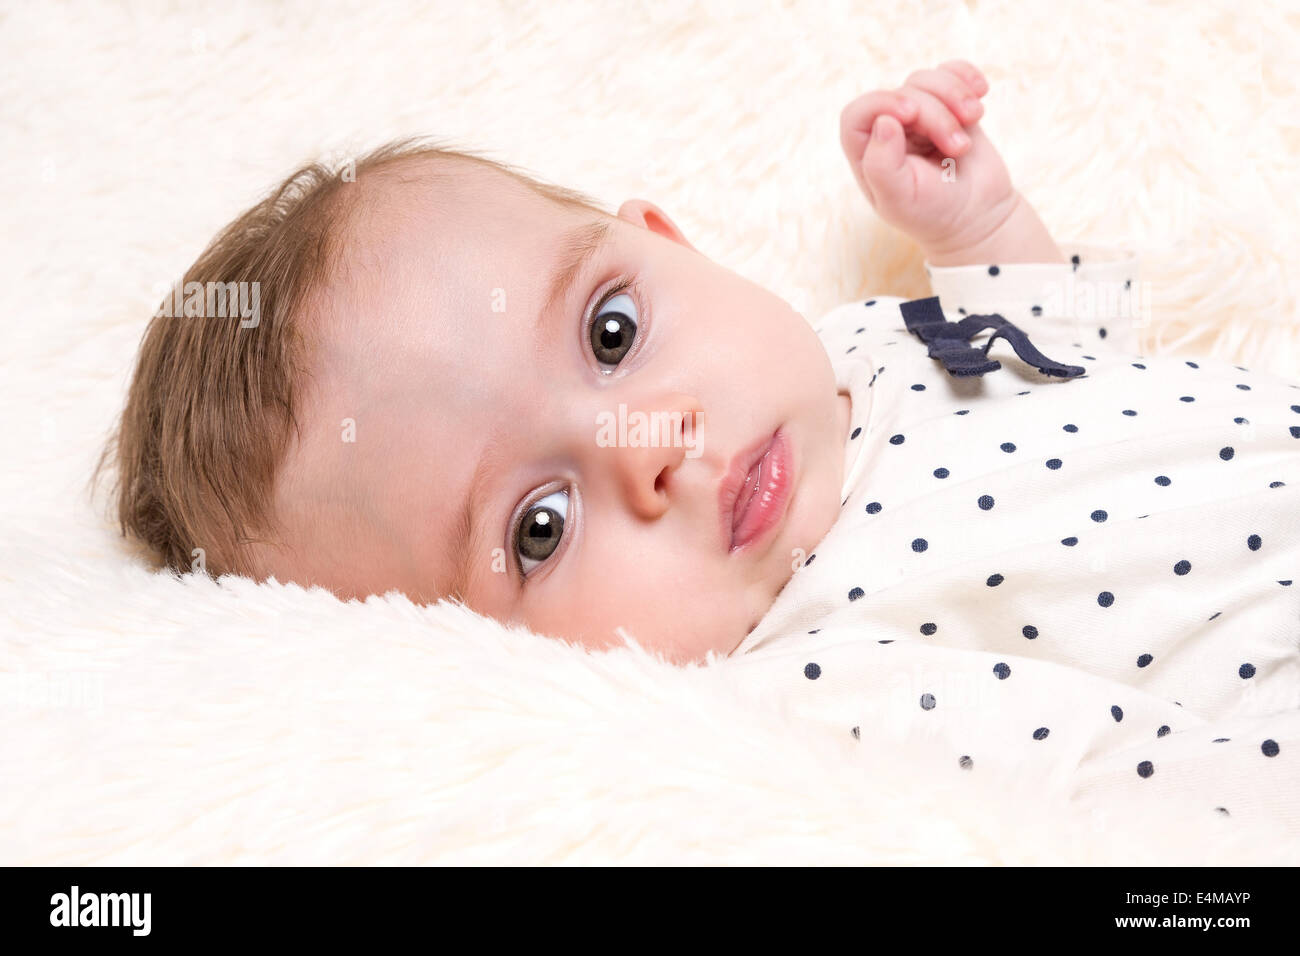 Portrait of Beautiful Baby Girl in Spotty Top resting on Cream Fur Rug Stock Photo